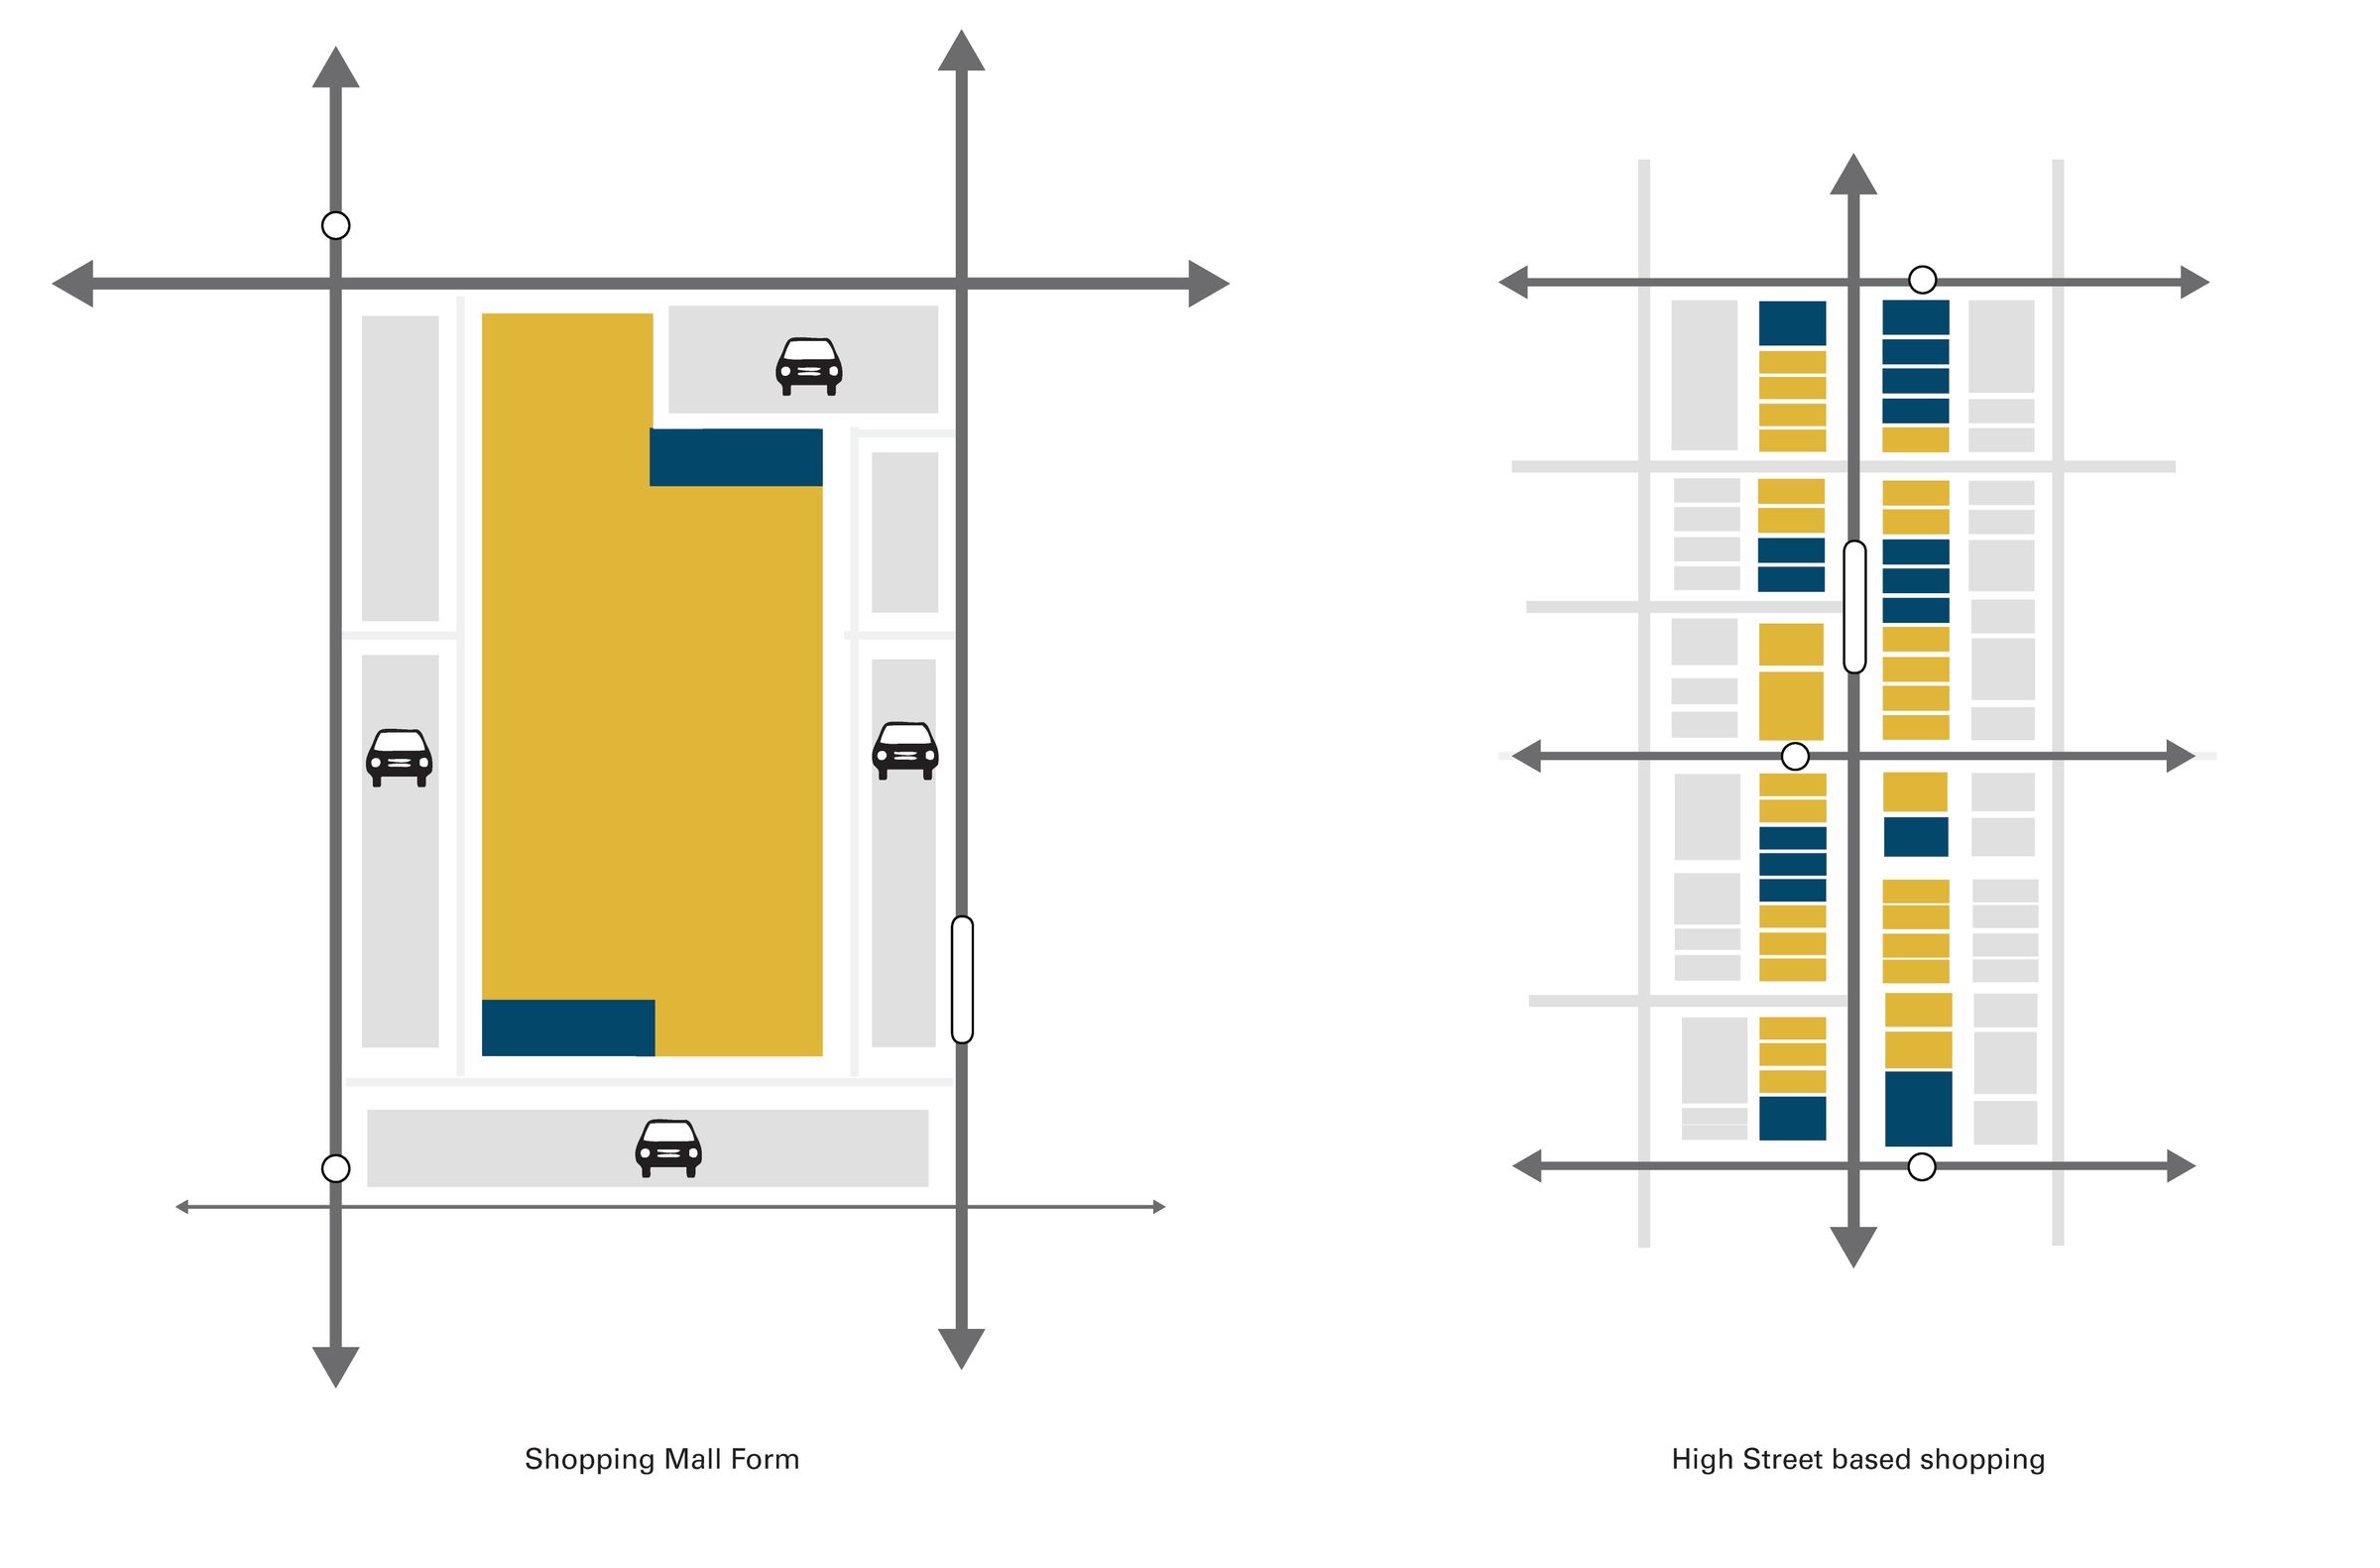 Diagram showing the plan of a typical shopping mall form next to a typical high street based shopping strip layout.